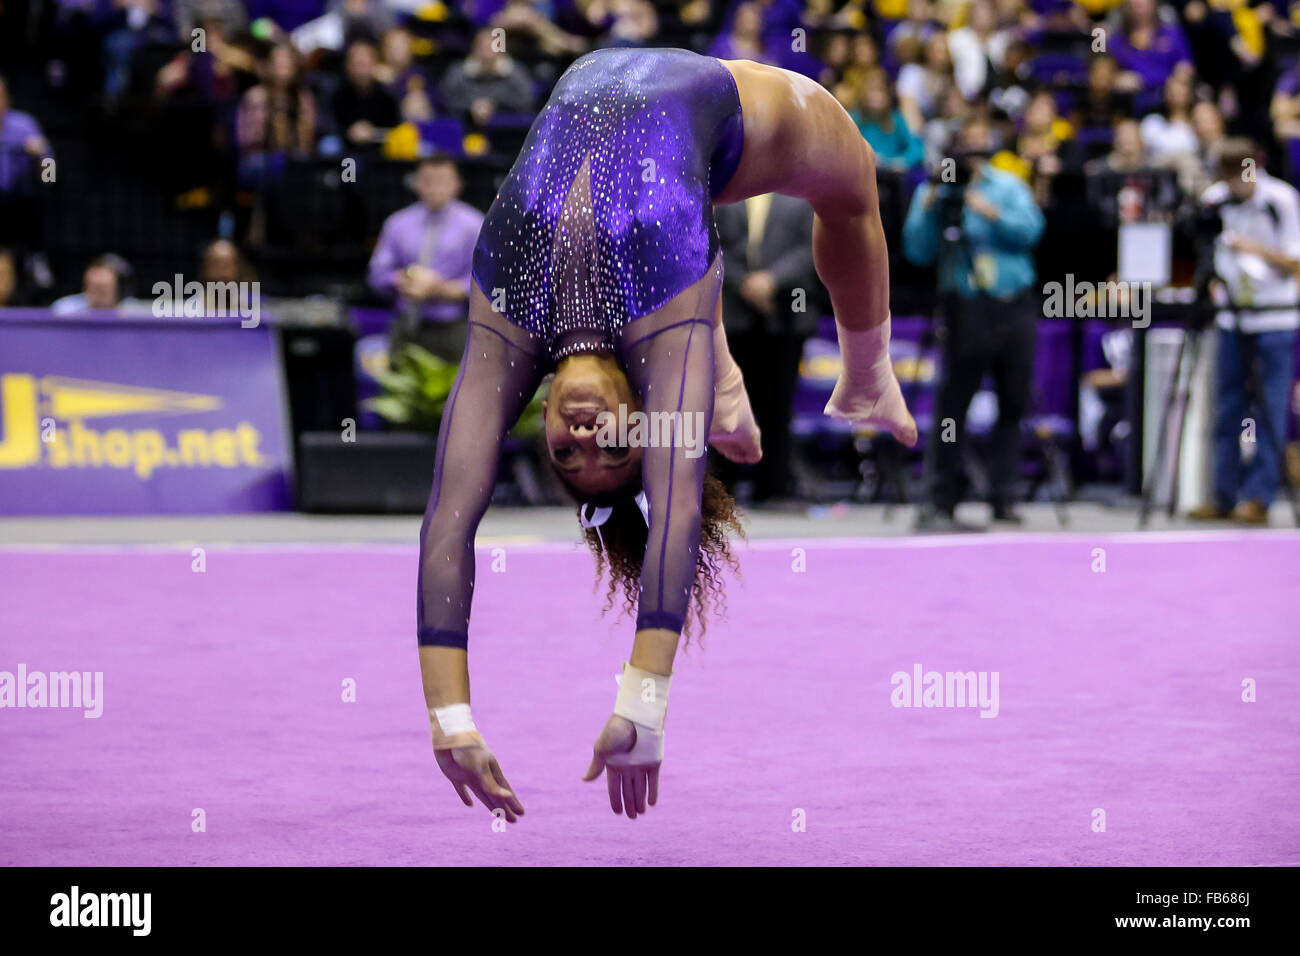 Baton Rouge, LA, USA. 09th Jan, 2016. LSU Tigers Randii Wyrick on the floor exercise during a NCAA gymnastics meet between the Oklahoma Sooners at LSU Tigers at the Pete Maravich Assembly Center in Baton Rouge, LA. Stephen Lew/CSM/Alamy Live News Stock Photo